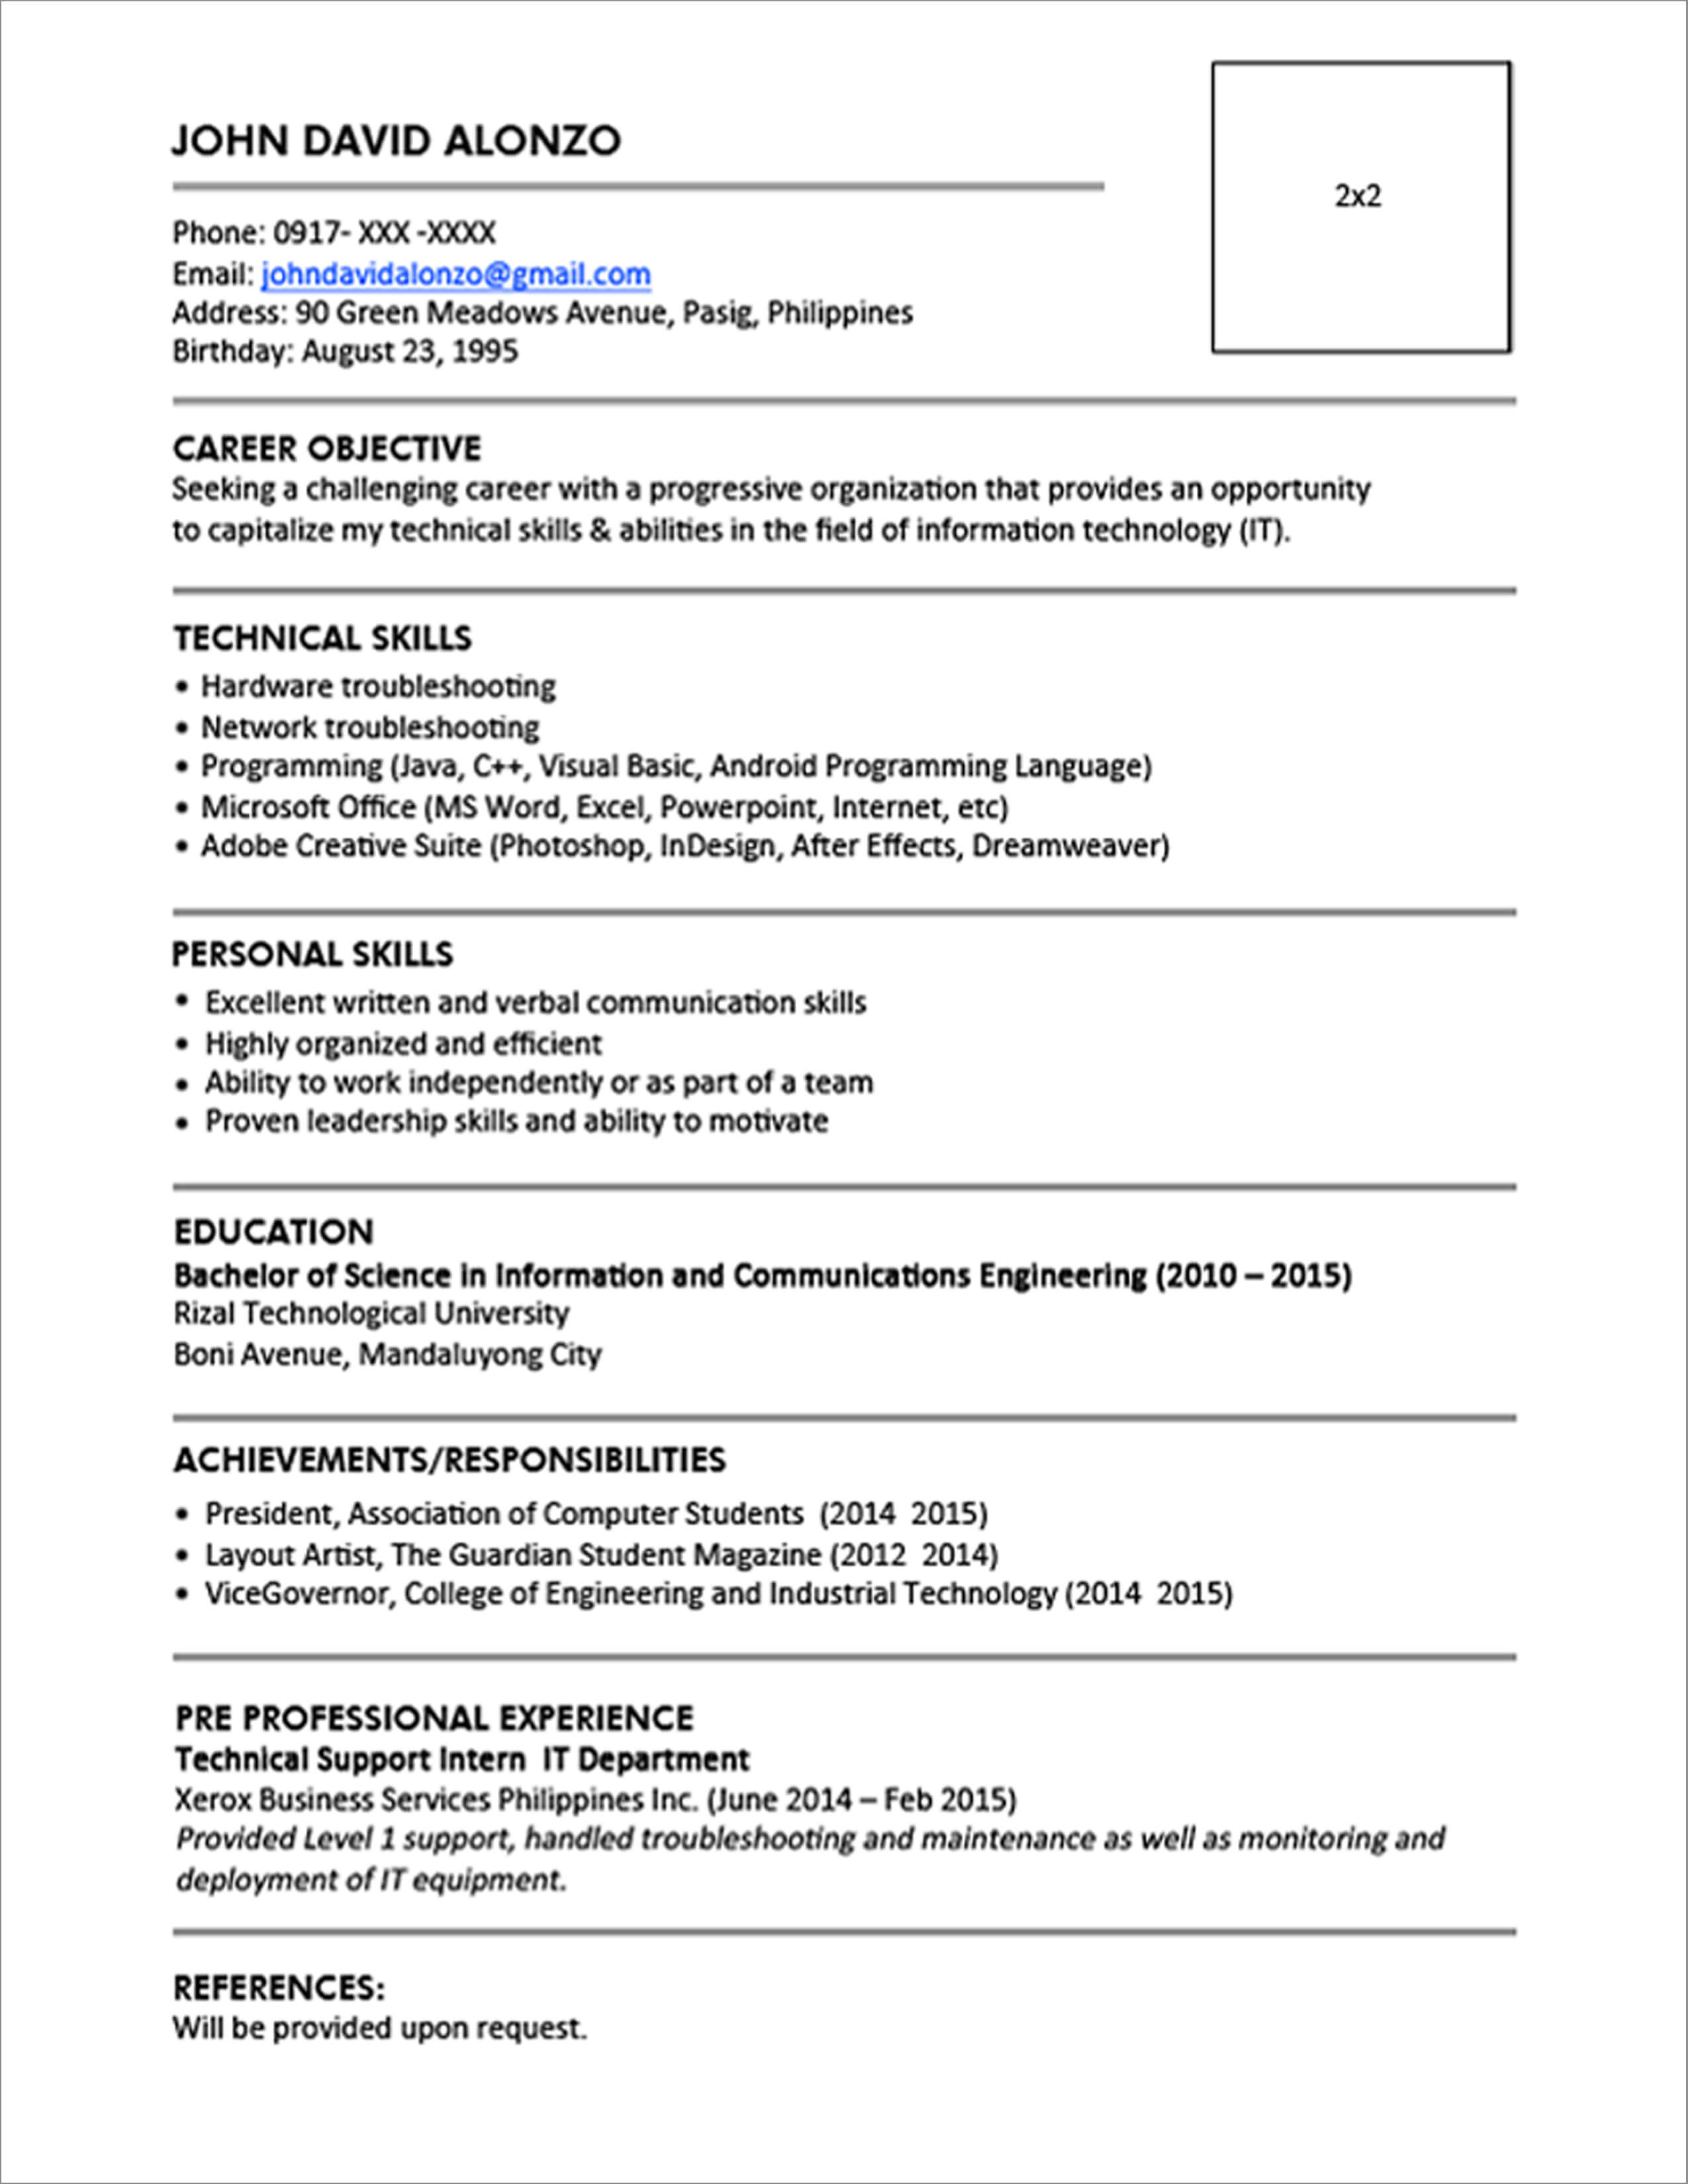 Resume Templates You Can Download | Jobstreet Philippines Intended For Free Basic Resume Templates Microsoft Word